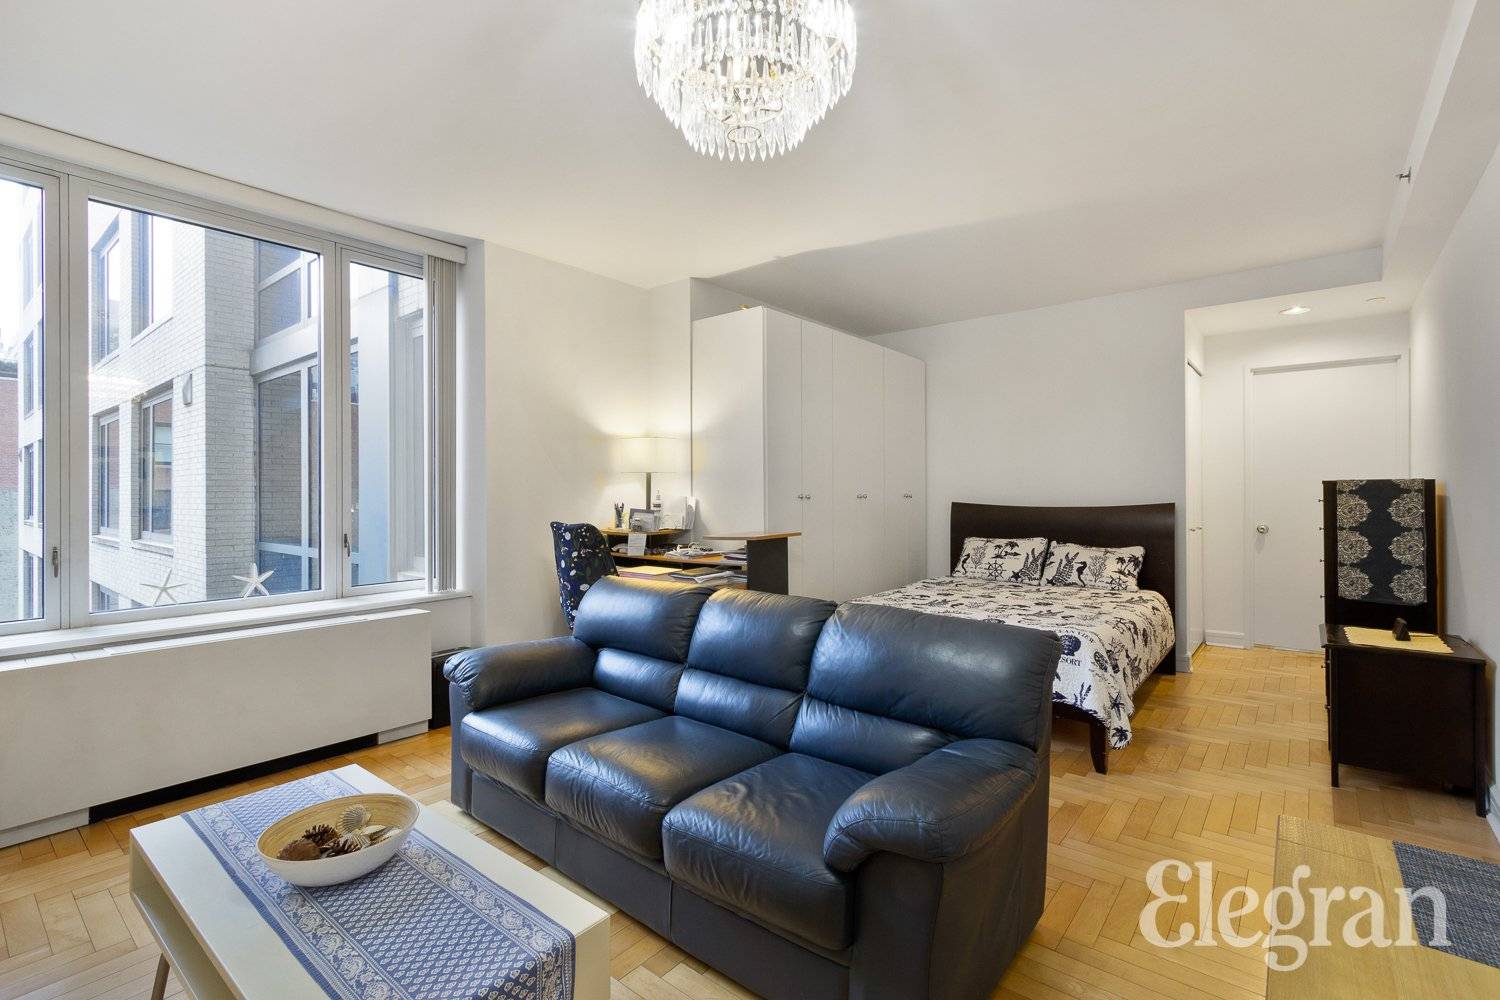 Located on a peaceful tree lined street, this garden view studio apartment offers the ease of low maintenance living while still being close to everything this vibrant neighborhood has to ...